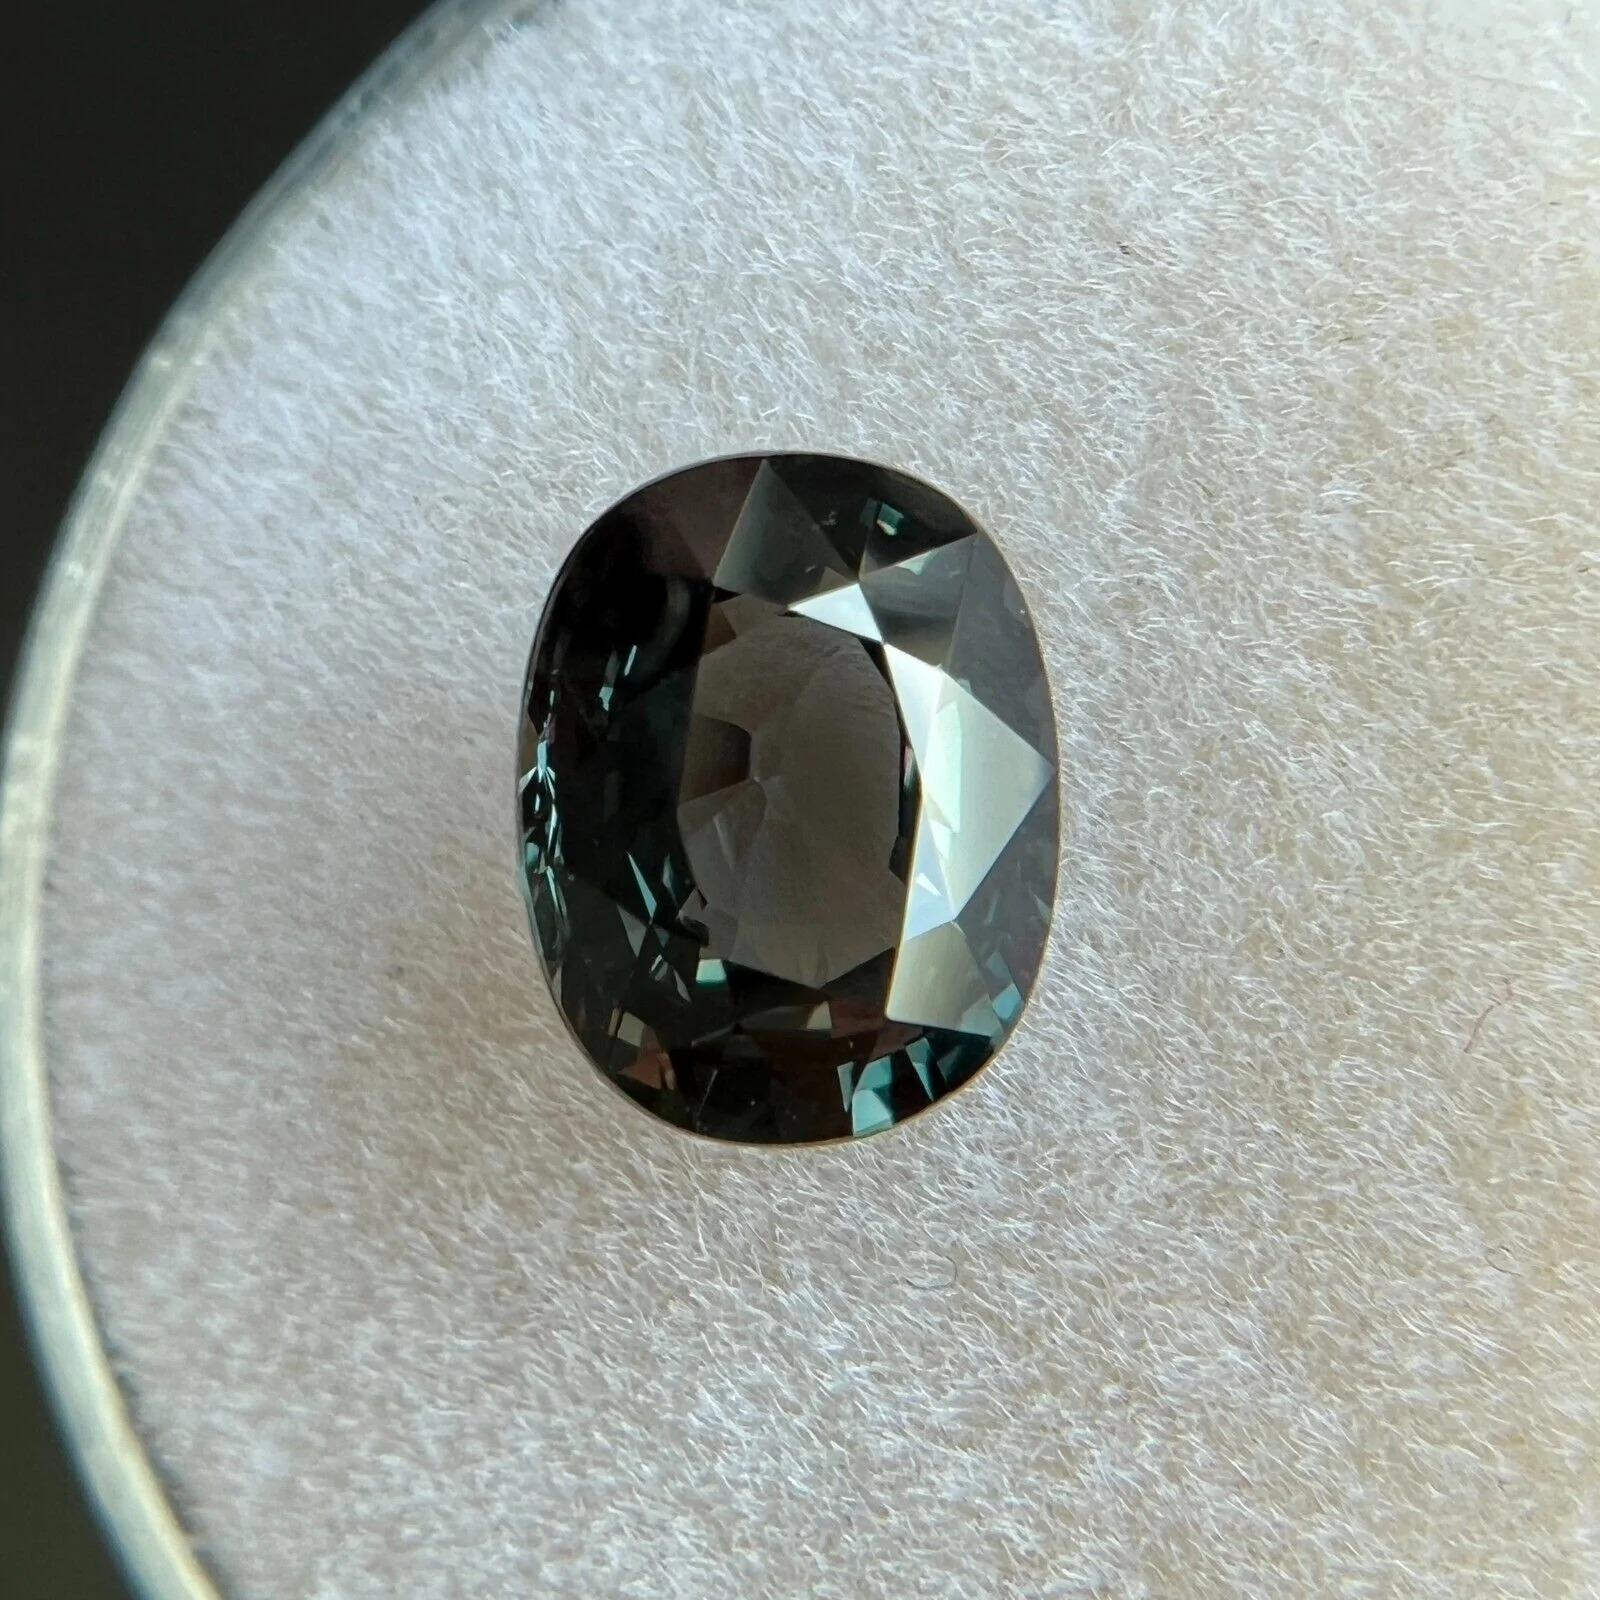 2.07ct Sapphire GIA Certified Untreated Colour Change Green Purple Oval Cut

Rare Untreated Colour Change Sapphire Gemstone.
2.07 Carat unheated sapphire with a rare colour change effect. Changing colour depending on the light its viewed in. Very